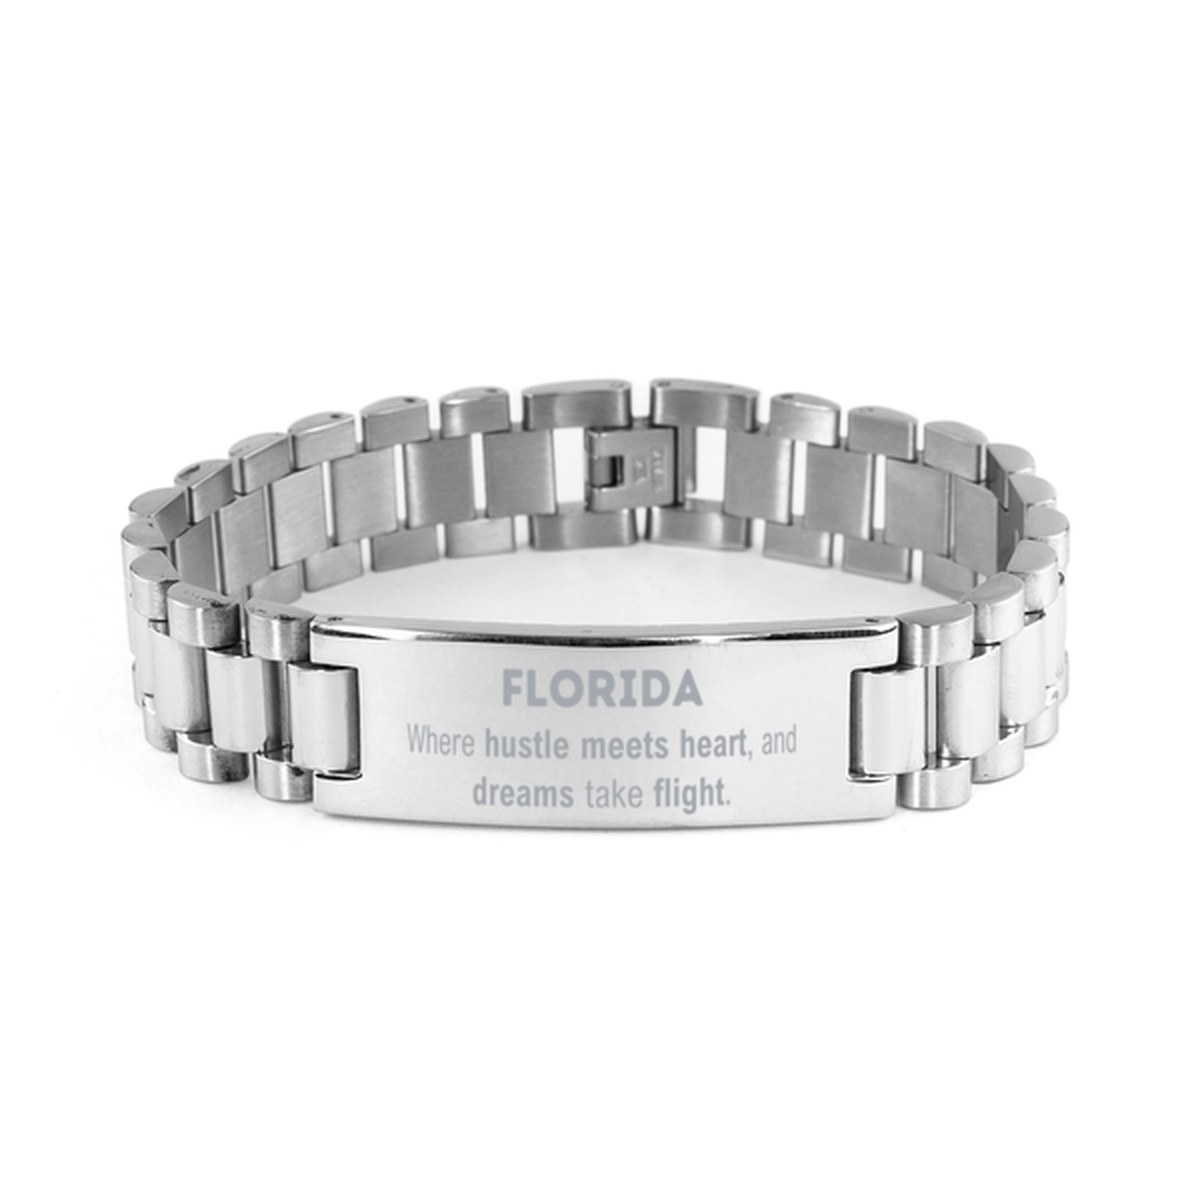 Florida: Where hustle meets heart, and dreams take flight, Florida Gifts, Proud Florida Christmas Birthday Florida Ladder Stainless Steel Bracelet, Florida State People, Men, Women, Friends